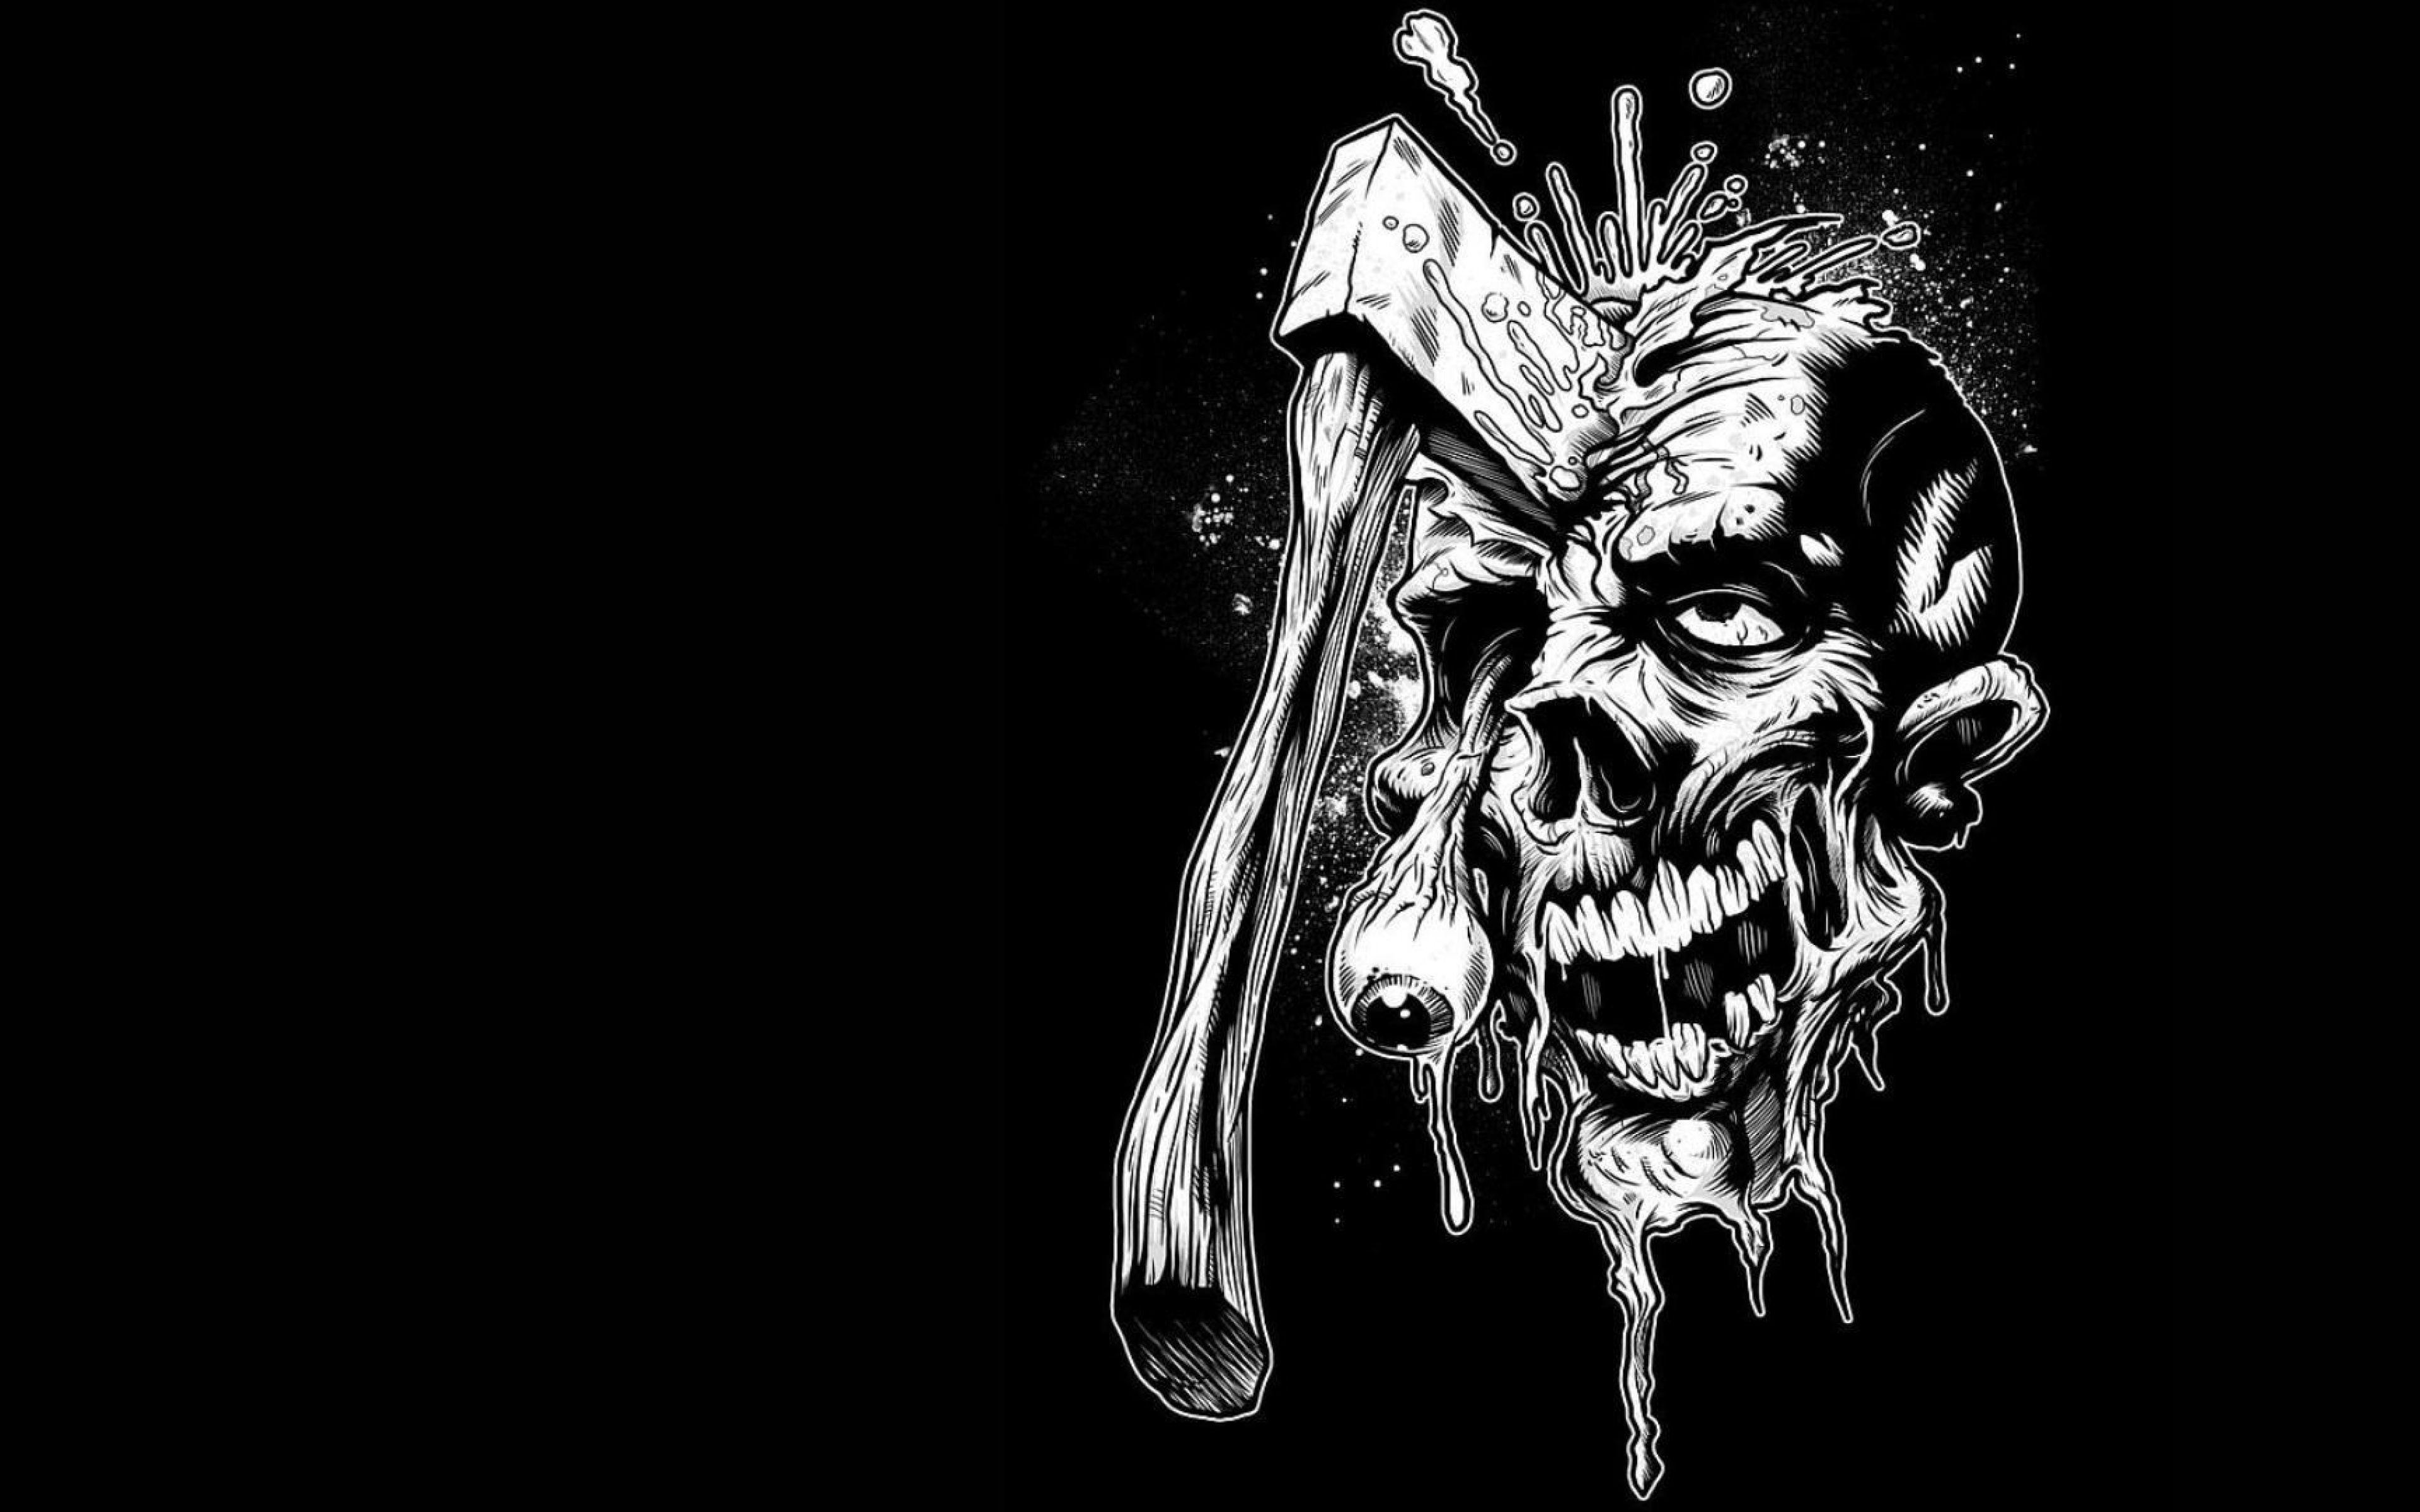 Zombie Wallpaper, HD Image Zombie Collection, Wallpaper Web